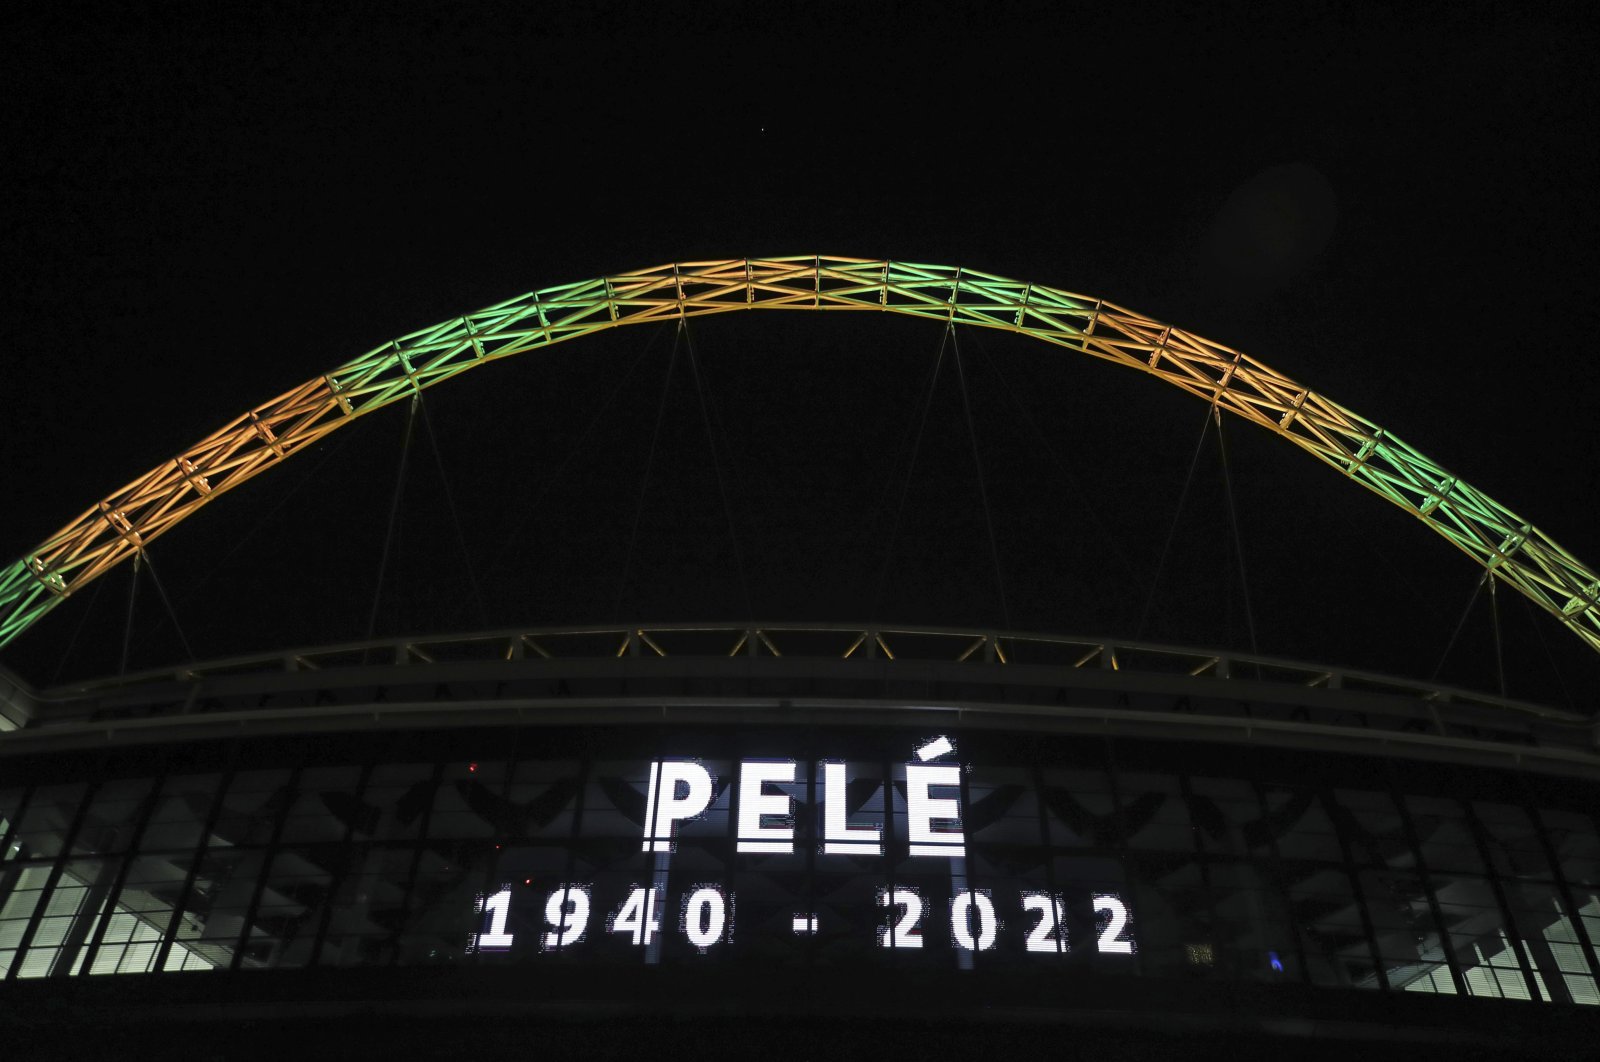 Wembley Stadium&#039;s arch is lit up in the colors of Brazil after it was announced that the former Brazilian footballer Pele had died, in London, Thursday, Dec. 29, 2022. (AP Photo)